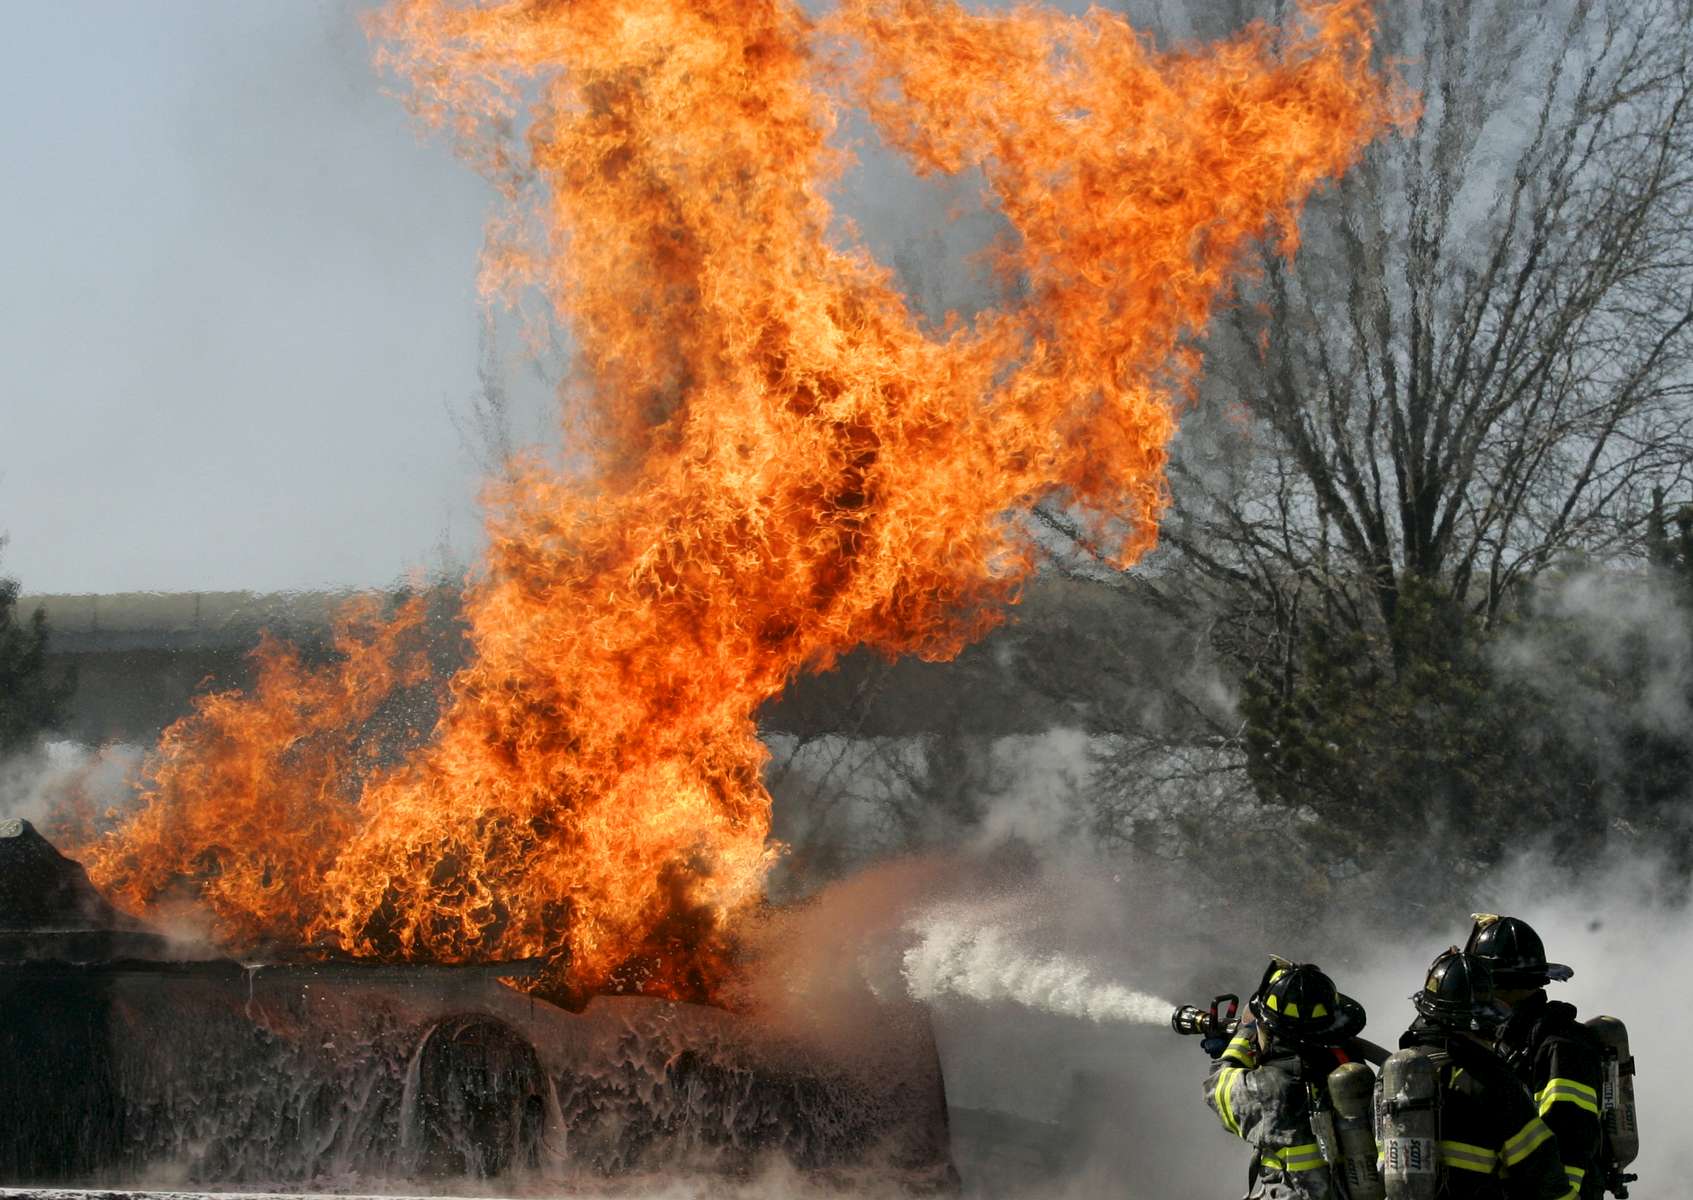 Firefighters battle the fire after a gasoline tank truck overturned and burst into flames at Van Wyck Expressway near North Conduit Avenue in Queens on March 03, 2008. 